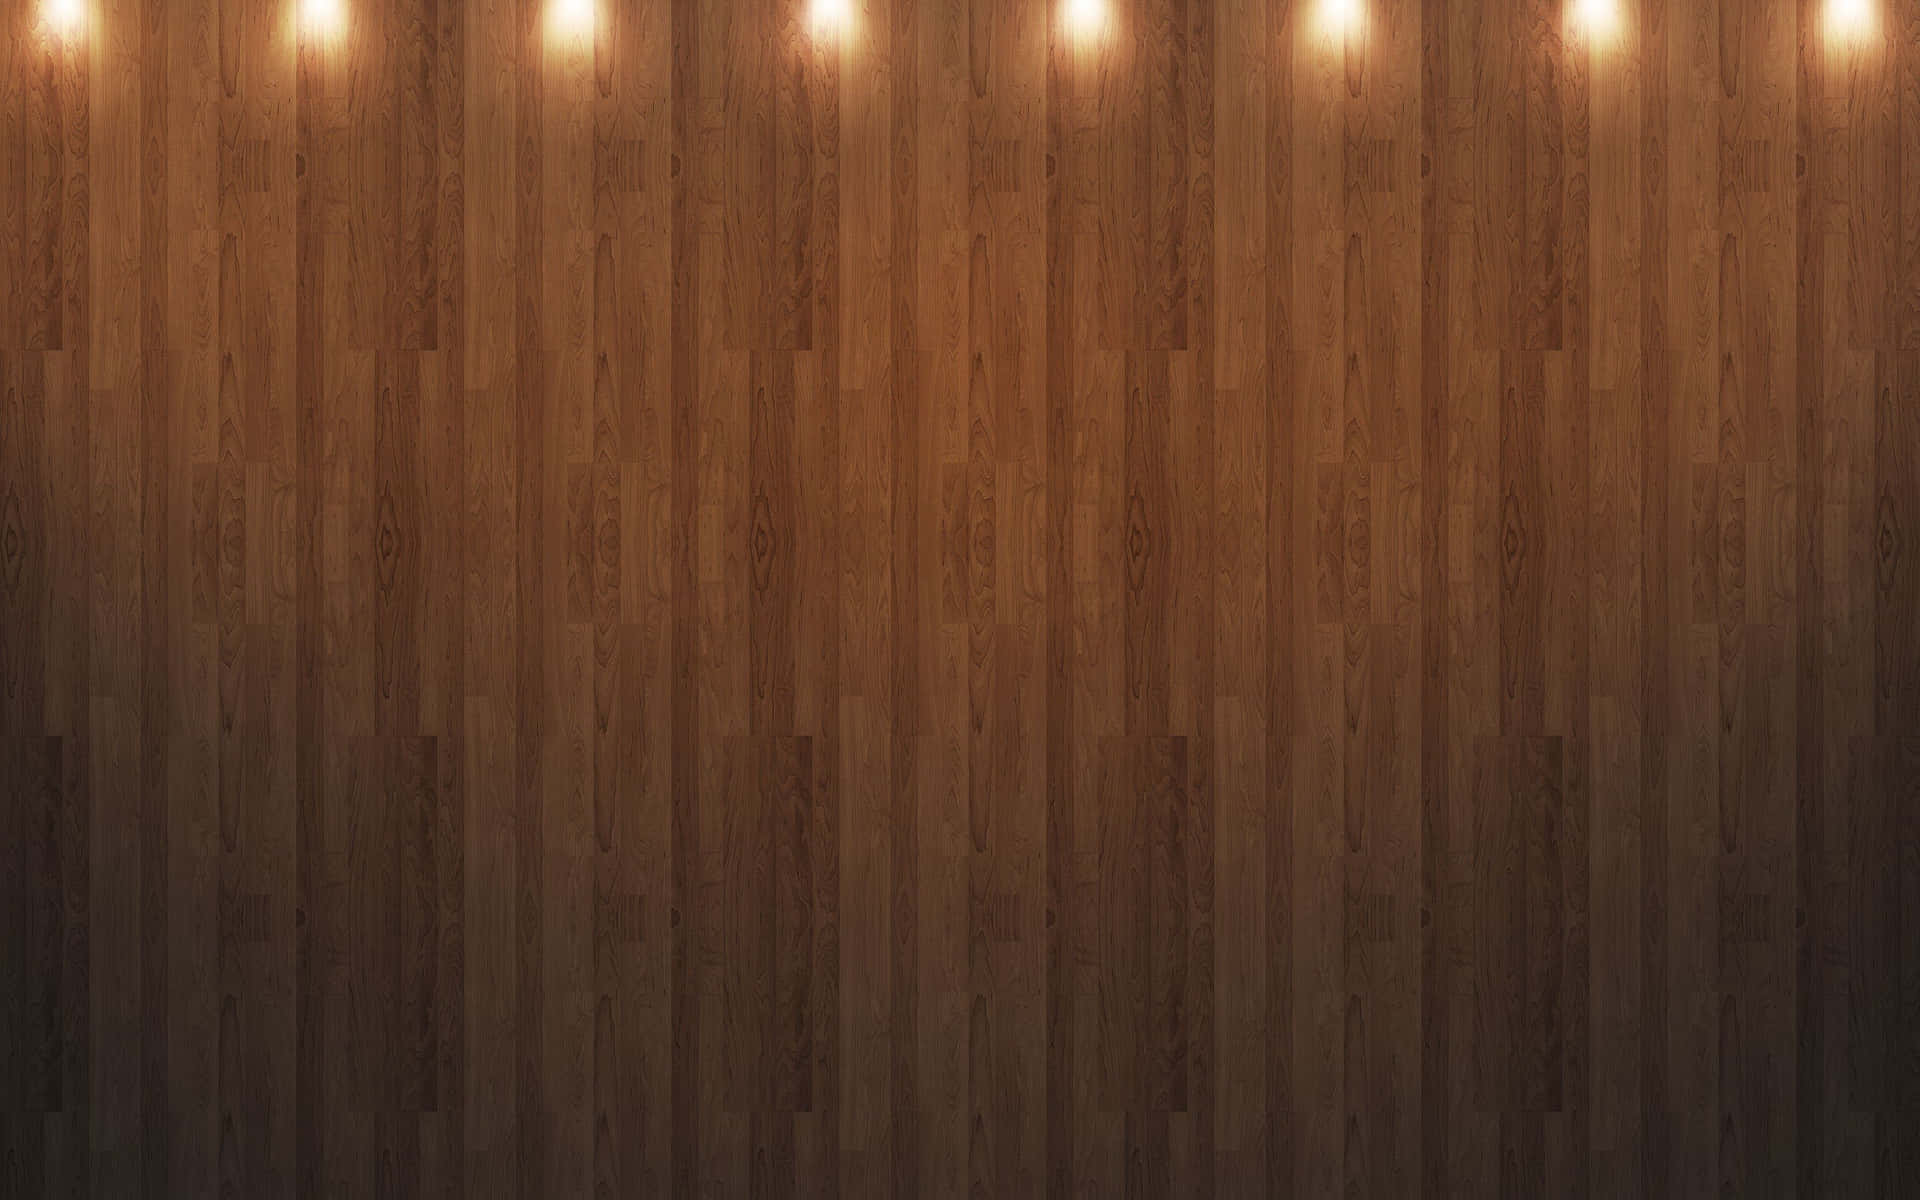 A lush light wood background perfect for adding a natural and calming touch.